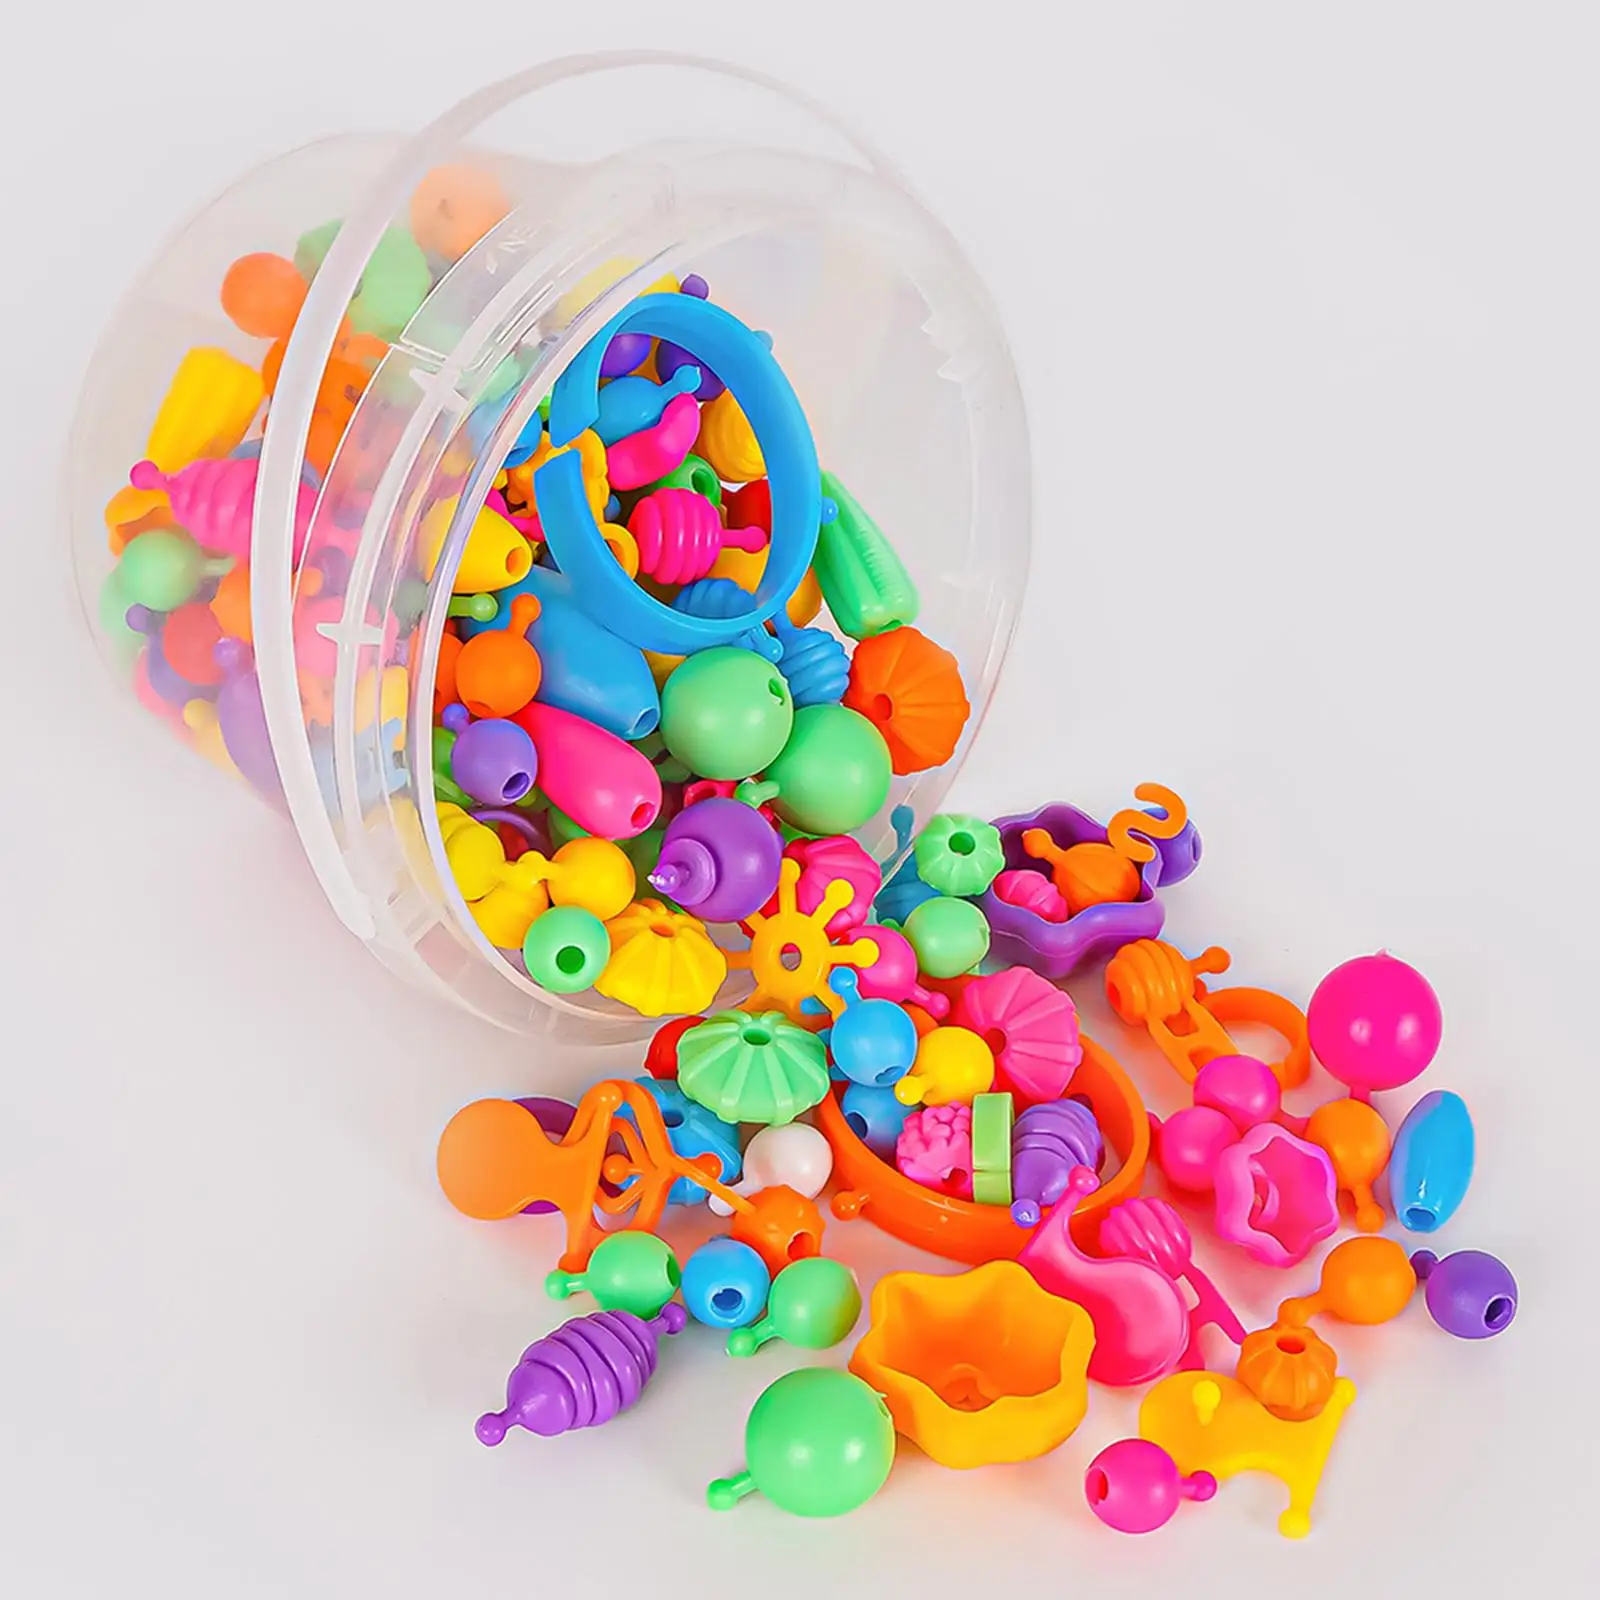 Beads Kids Jewelry Making Kit DIY Arts Crafts Supplies Snap Bead Toys for Hairband Bracelet Earrings Necklace Birthday Gift